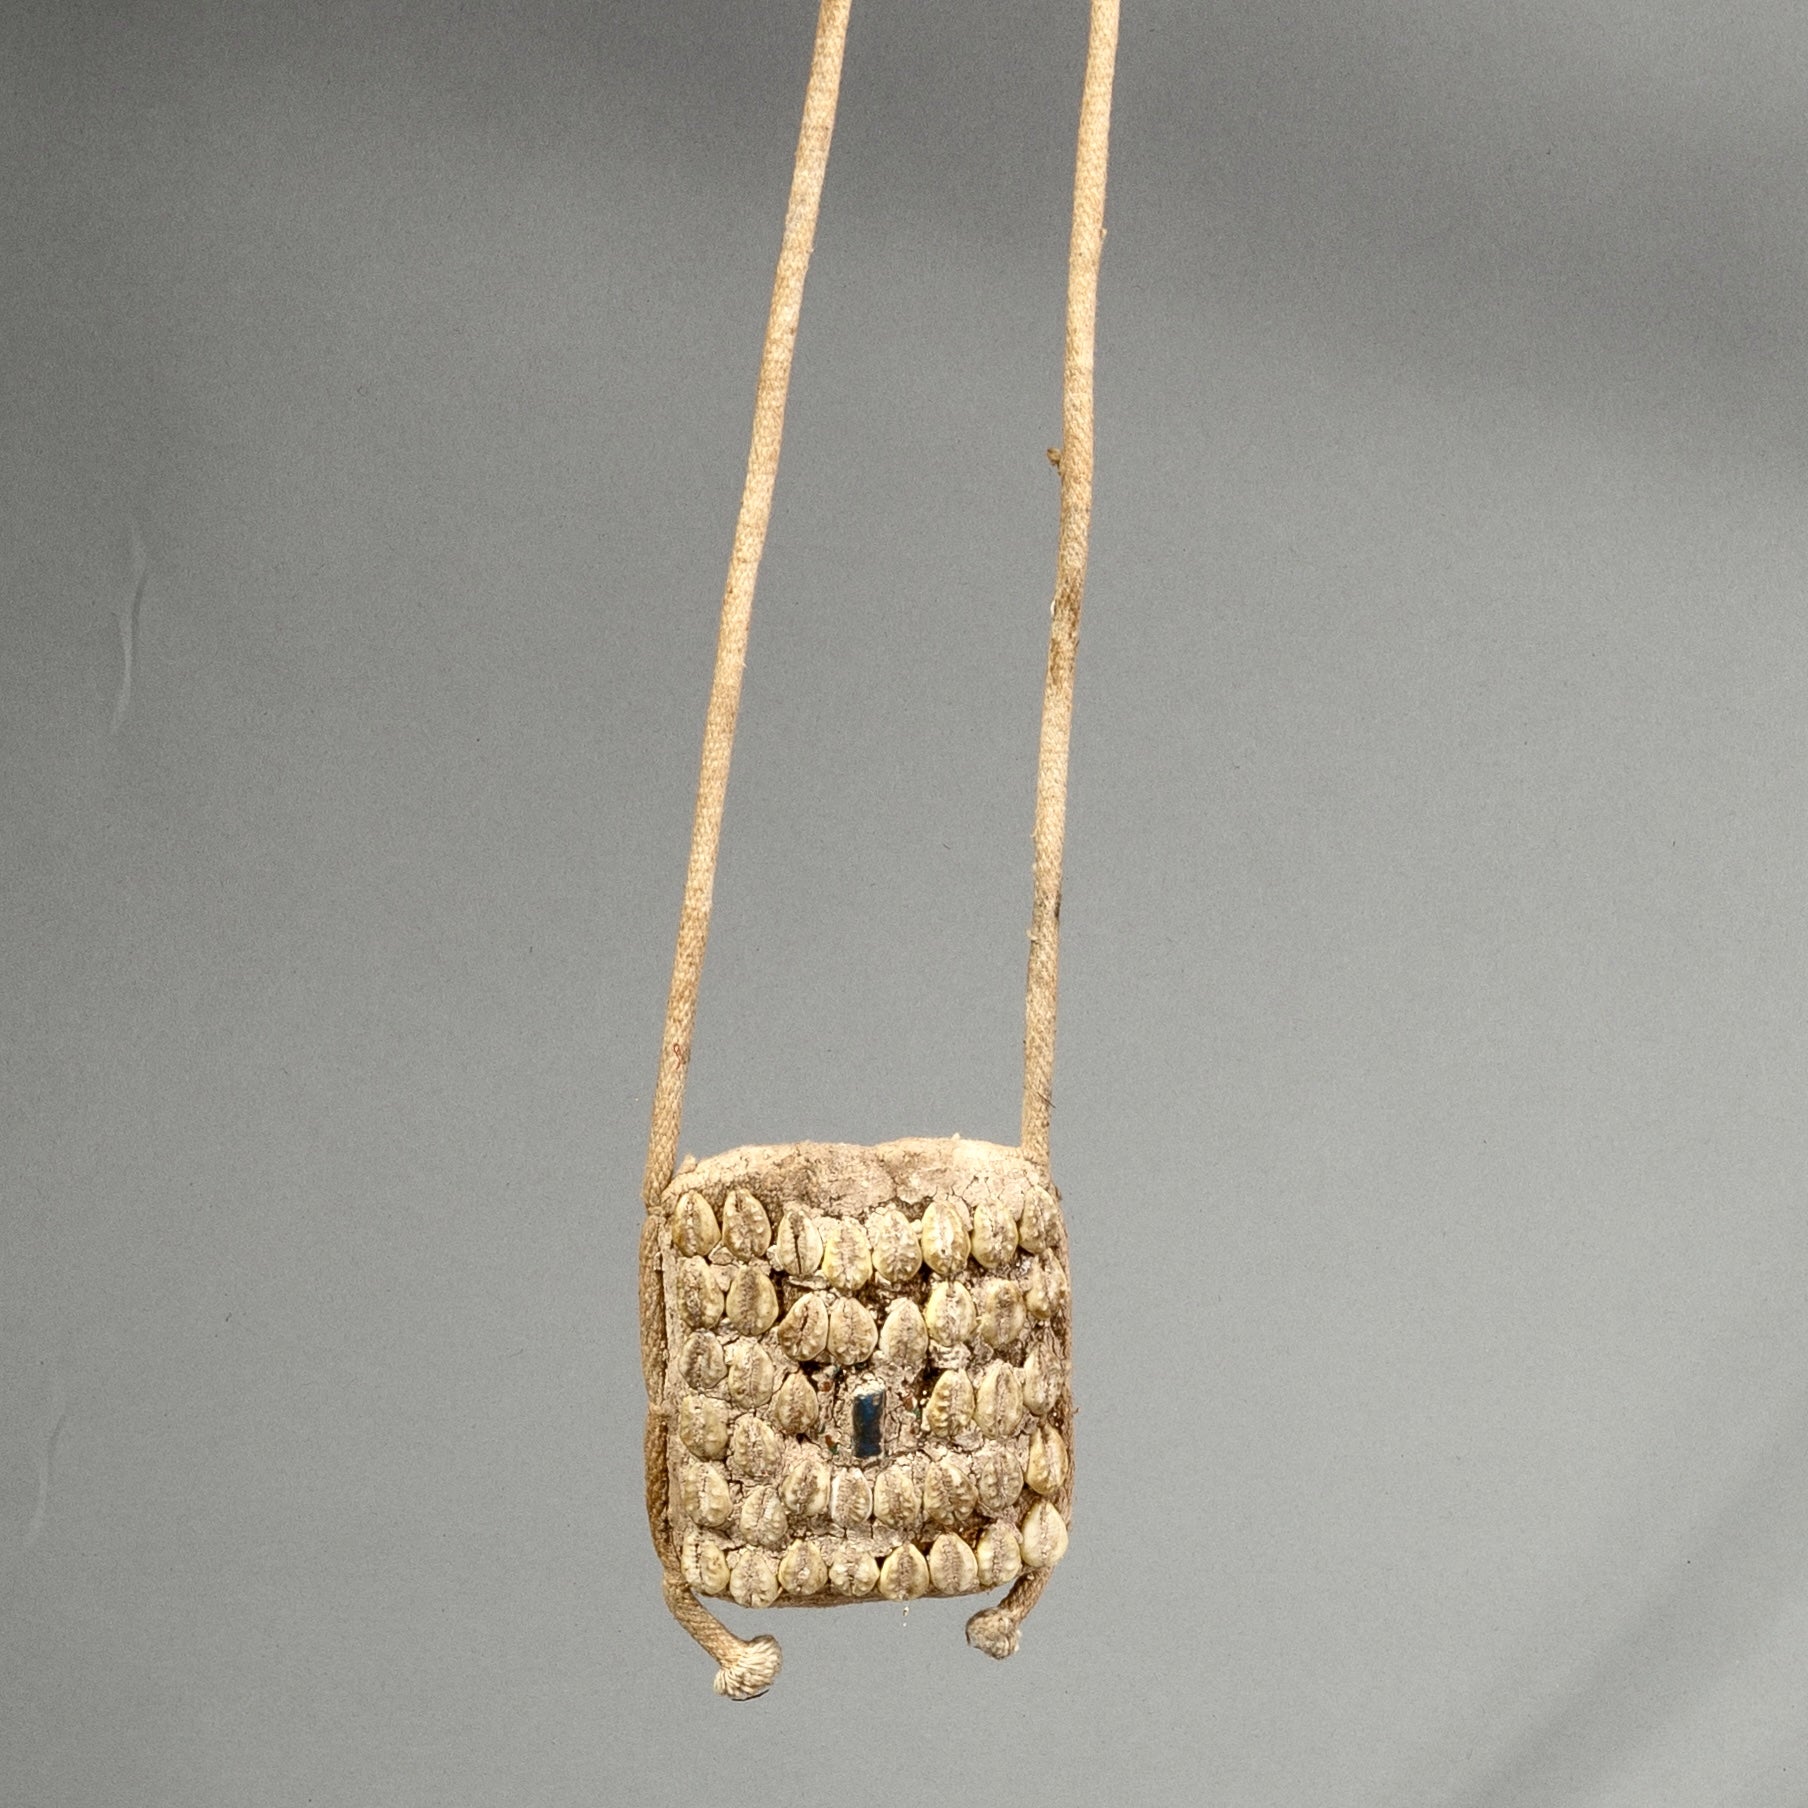 AN EWE ENCRUSTED TALISMANIC NECKLACE FROM EWE TRIBE OF GHANA No 1515)